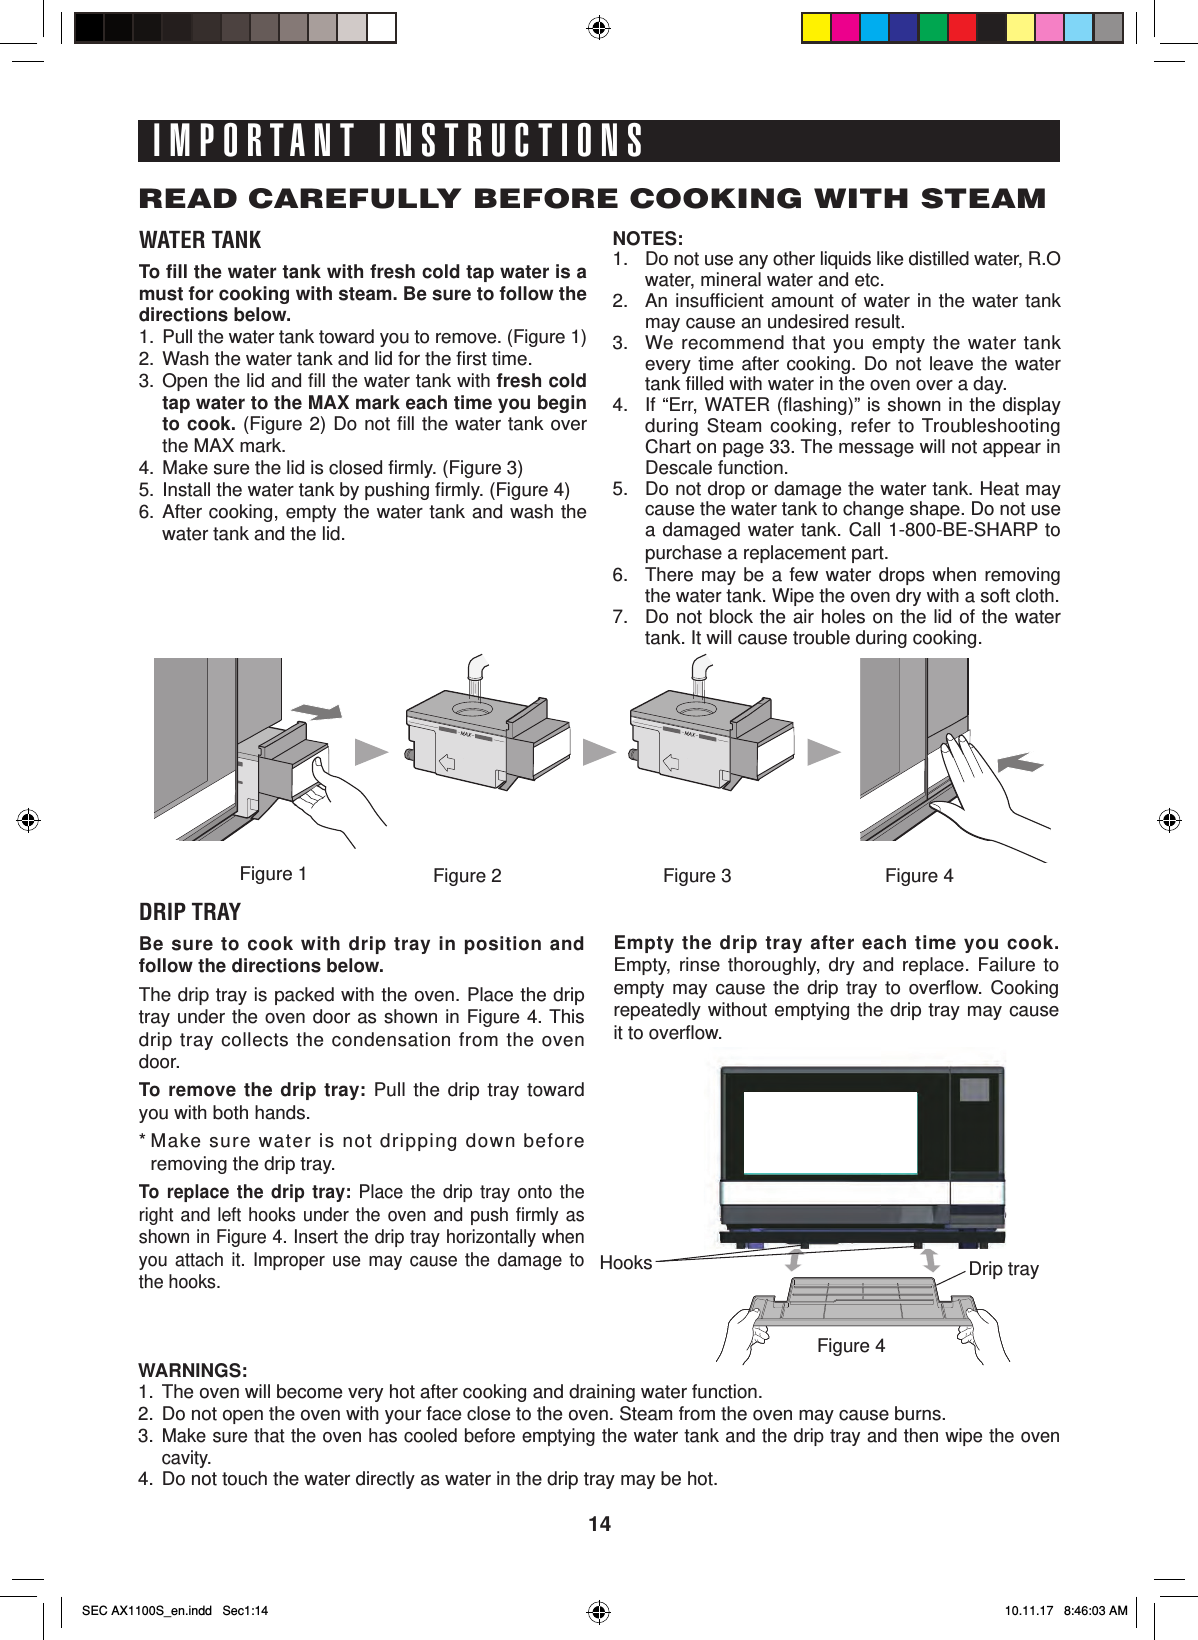 14IMPORTANT INSTRUCTIONSREAD CAREFULLY BEFORE COOKING WITH STEAMWATER TANKTo ﬁ ll the water tank with fresh cold tap water is a must for cooking with steam. Be sure to follow the directions below.1.  Pull the water tank toward you to remove. (Figure 1)2.  Wash the water tank and lid for the ﬁ rst time. 3. Open the lid and ﬁ ll the water tank with fresh cold tap water to the MAX mark each time you begin to cook. (Figure 2) Do not ﬁ ll the water tank over the MAX mark.4.  Make sure the lid is closed ﬁ rmly. (Figure 3)5.  Install the water tank by pushing ﬁ rmly. (Figure 4)6. After cooking, empty the water tank and wash the water tank and the lid.NOTES:1.  Do not use any other liquids like distilled water, R.O water, mineral water and etc.2.  An insufﬁ cient amount of water in the water tank may cause an undesired result.3.  We recommend that you empty the water tank every time after cooking. Do not leave the water tank ﬁ lled with water in the oven over a day. 4.  If “Err, WATER (ﬂ ashing)” is shown in the display during Steam cooking, refer to Troubleshooting Chart on page 33. The message will not appear in Descale function.5.  Do not drop or damage the water tank. Heat may cause the water tank to change shape. Do not use a damaged water tank. Call 1-800-BE-SHARP to purchase a replacement part.6. There may be a few water drops when removing the water tank. Wipe the oven dry with a soft cloth.7.  Do not block the air holes on the lid of the water tank. It will cause trouble during cooking.DRIP TRAYBe sure to cook with drip tray in position and follow the directions below.The drip tray is packed with the oven. Place the drip tray under the oven door as shown in Figure 4. This drip tray collects the condensation from the oven door. To remove the drip tray: Pull the drip tray toward you with both hands.* Make sure water is not dripping down before removing the drip tray.To replace the drip tray: Place the drip tray onto the right and left hooks under the oven and push ﬁ rmly  as shown in Figure 4. Insert the drip tray horizontally when you attach it. Improper use may cause the damage to the hooks.Empty the drip tray after each time you cook. Empty, rinse thoroughly, dry and replace. Failure to empty may cause the drip tray to overﬂ ow.  Cooking repeatedly without emptying the drip tray may cause it to overﬂ ow.WARNINGS:1.  The oven will become very hot after cooking and draining water function.2.  Do not open the oven with your face close to the oven. Steam from the oven may cause burns.3. Make sure that the oven has cooled before emptying the water tank and the drip tray and then wipe the oven cavity.4.  Do not touch the water directly as water in the drip tray may be hot.Figure 2 Figure 4Figure 1Figure 4Drip trayHooksFigure 3SEC AX1100S_en.indd   Sec1:14SEC AX1100S_en.indd   Sec1:14 10.11.17   8:46:03 AM10.11.17   8:46:03 AM